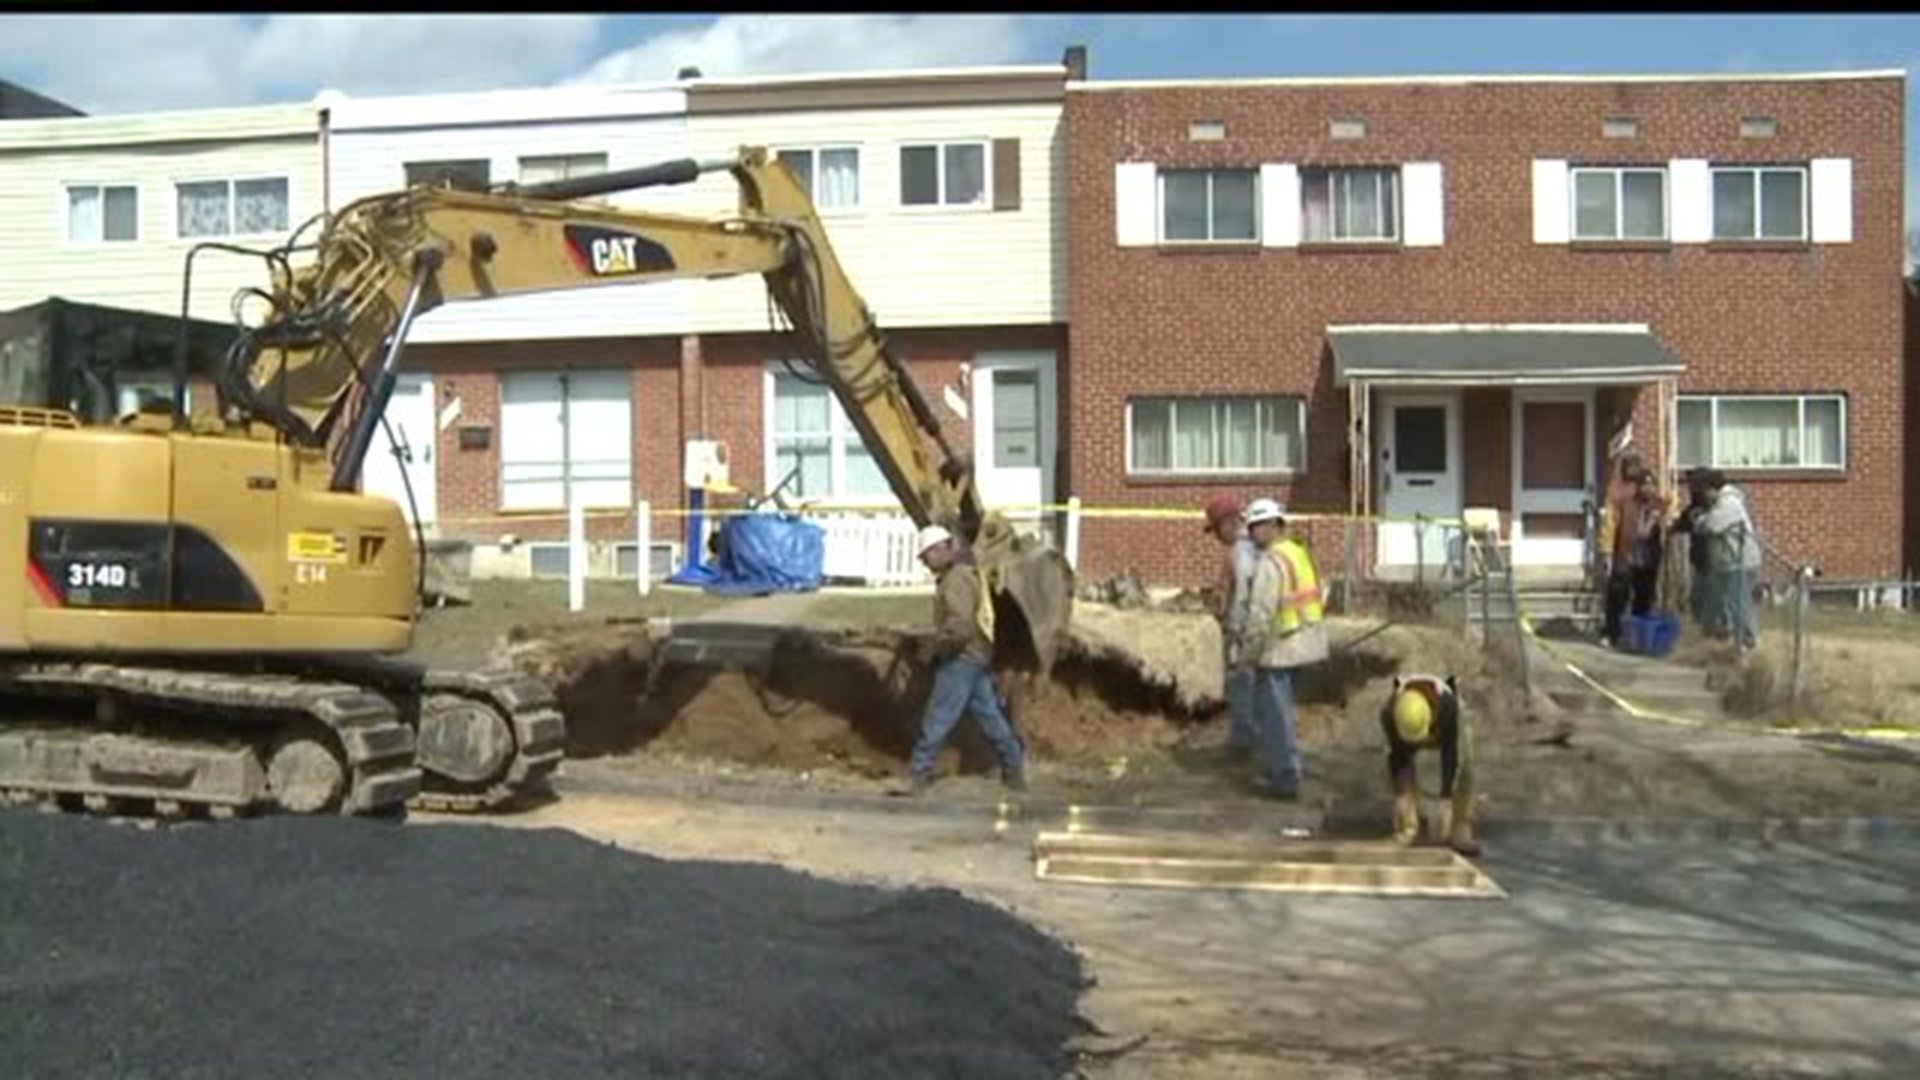 Dauphin County could give Harrisburg $1 million to deal with sinkholes